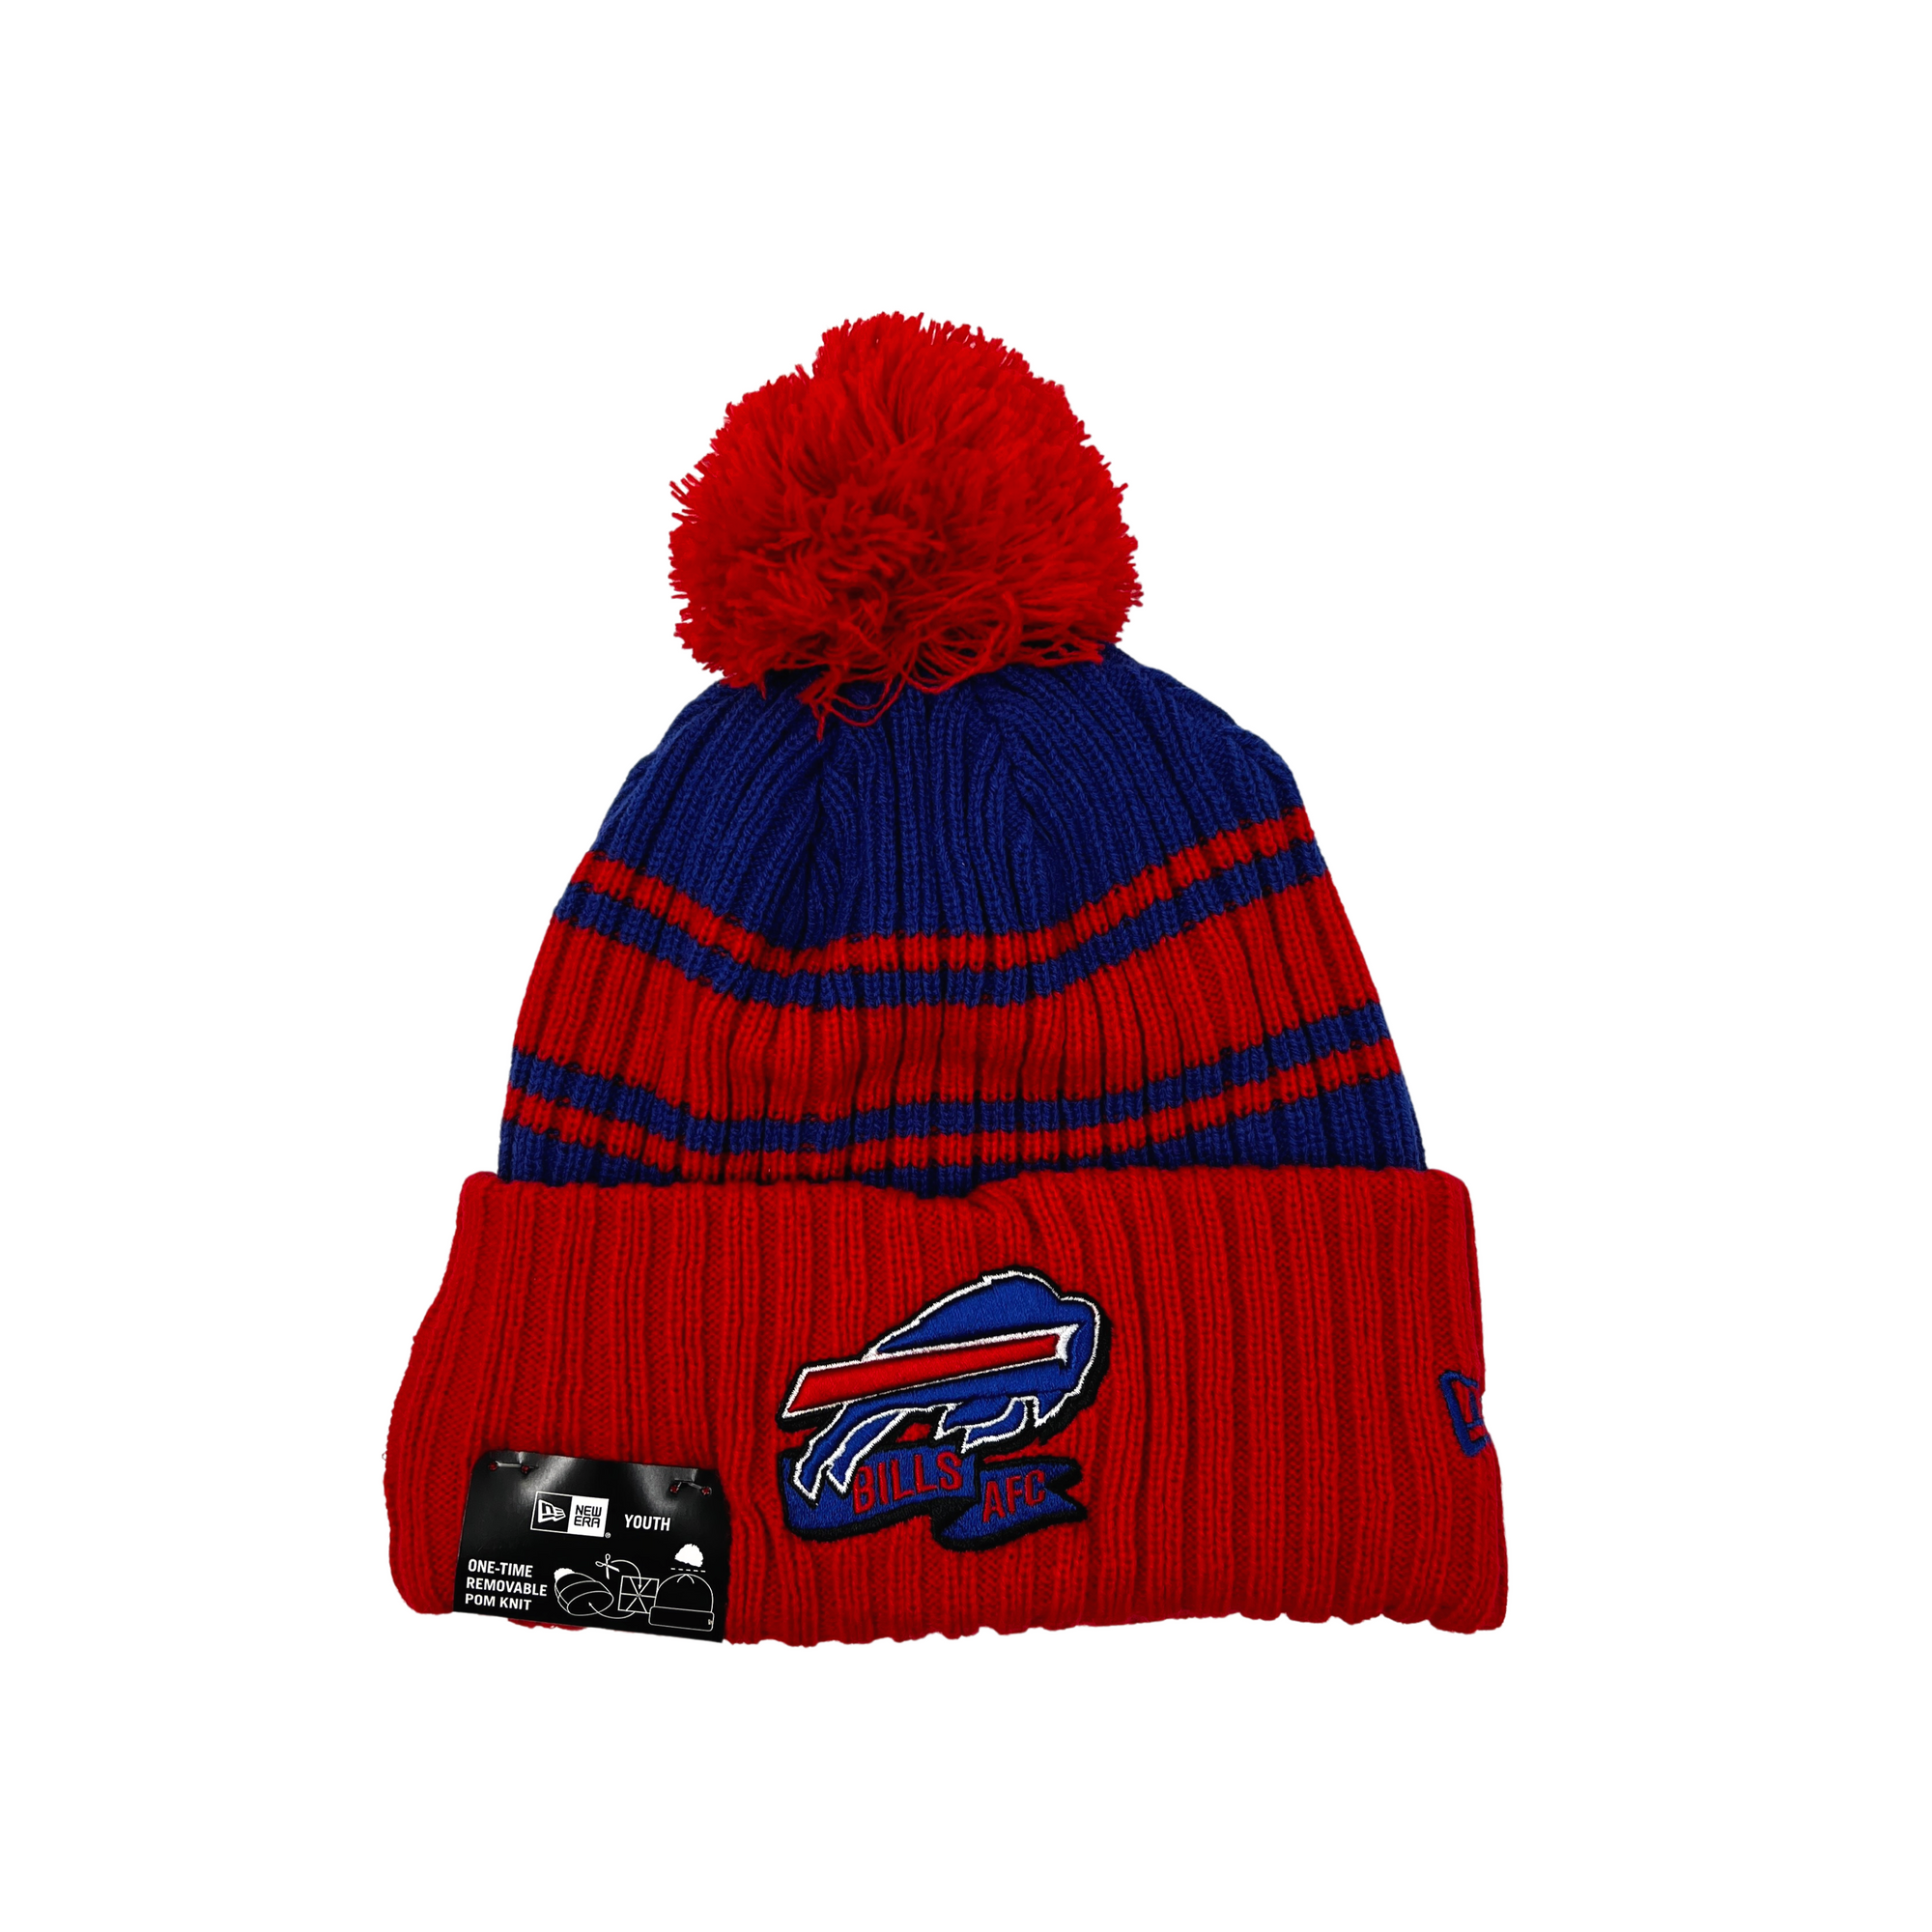 bflo store Youth Buffalo Bills Red and Blue Sideline Knit Hat